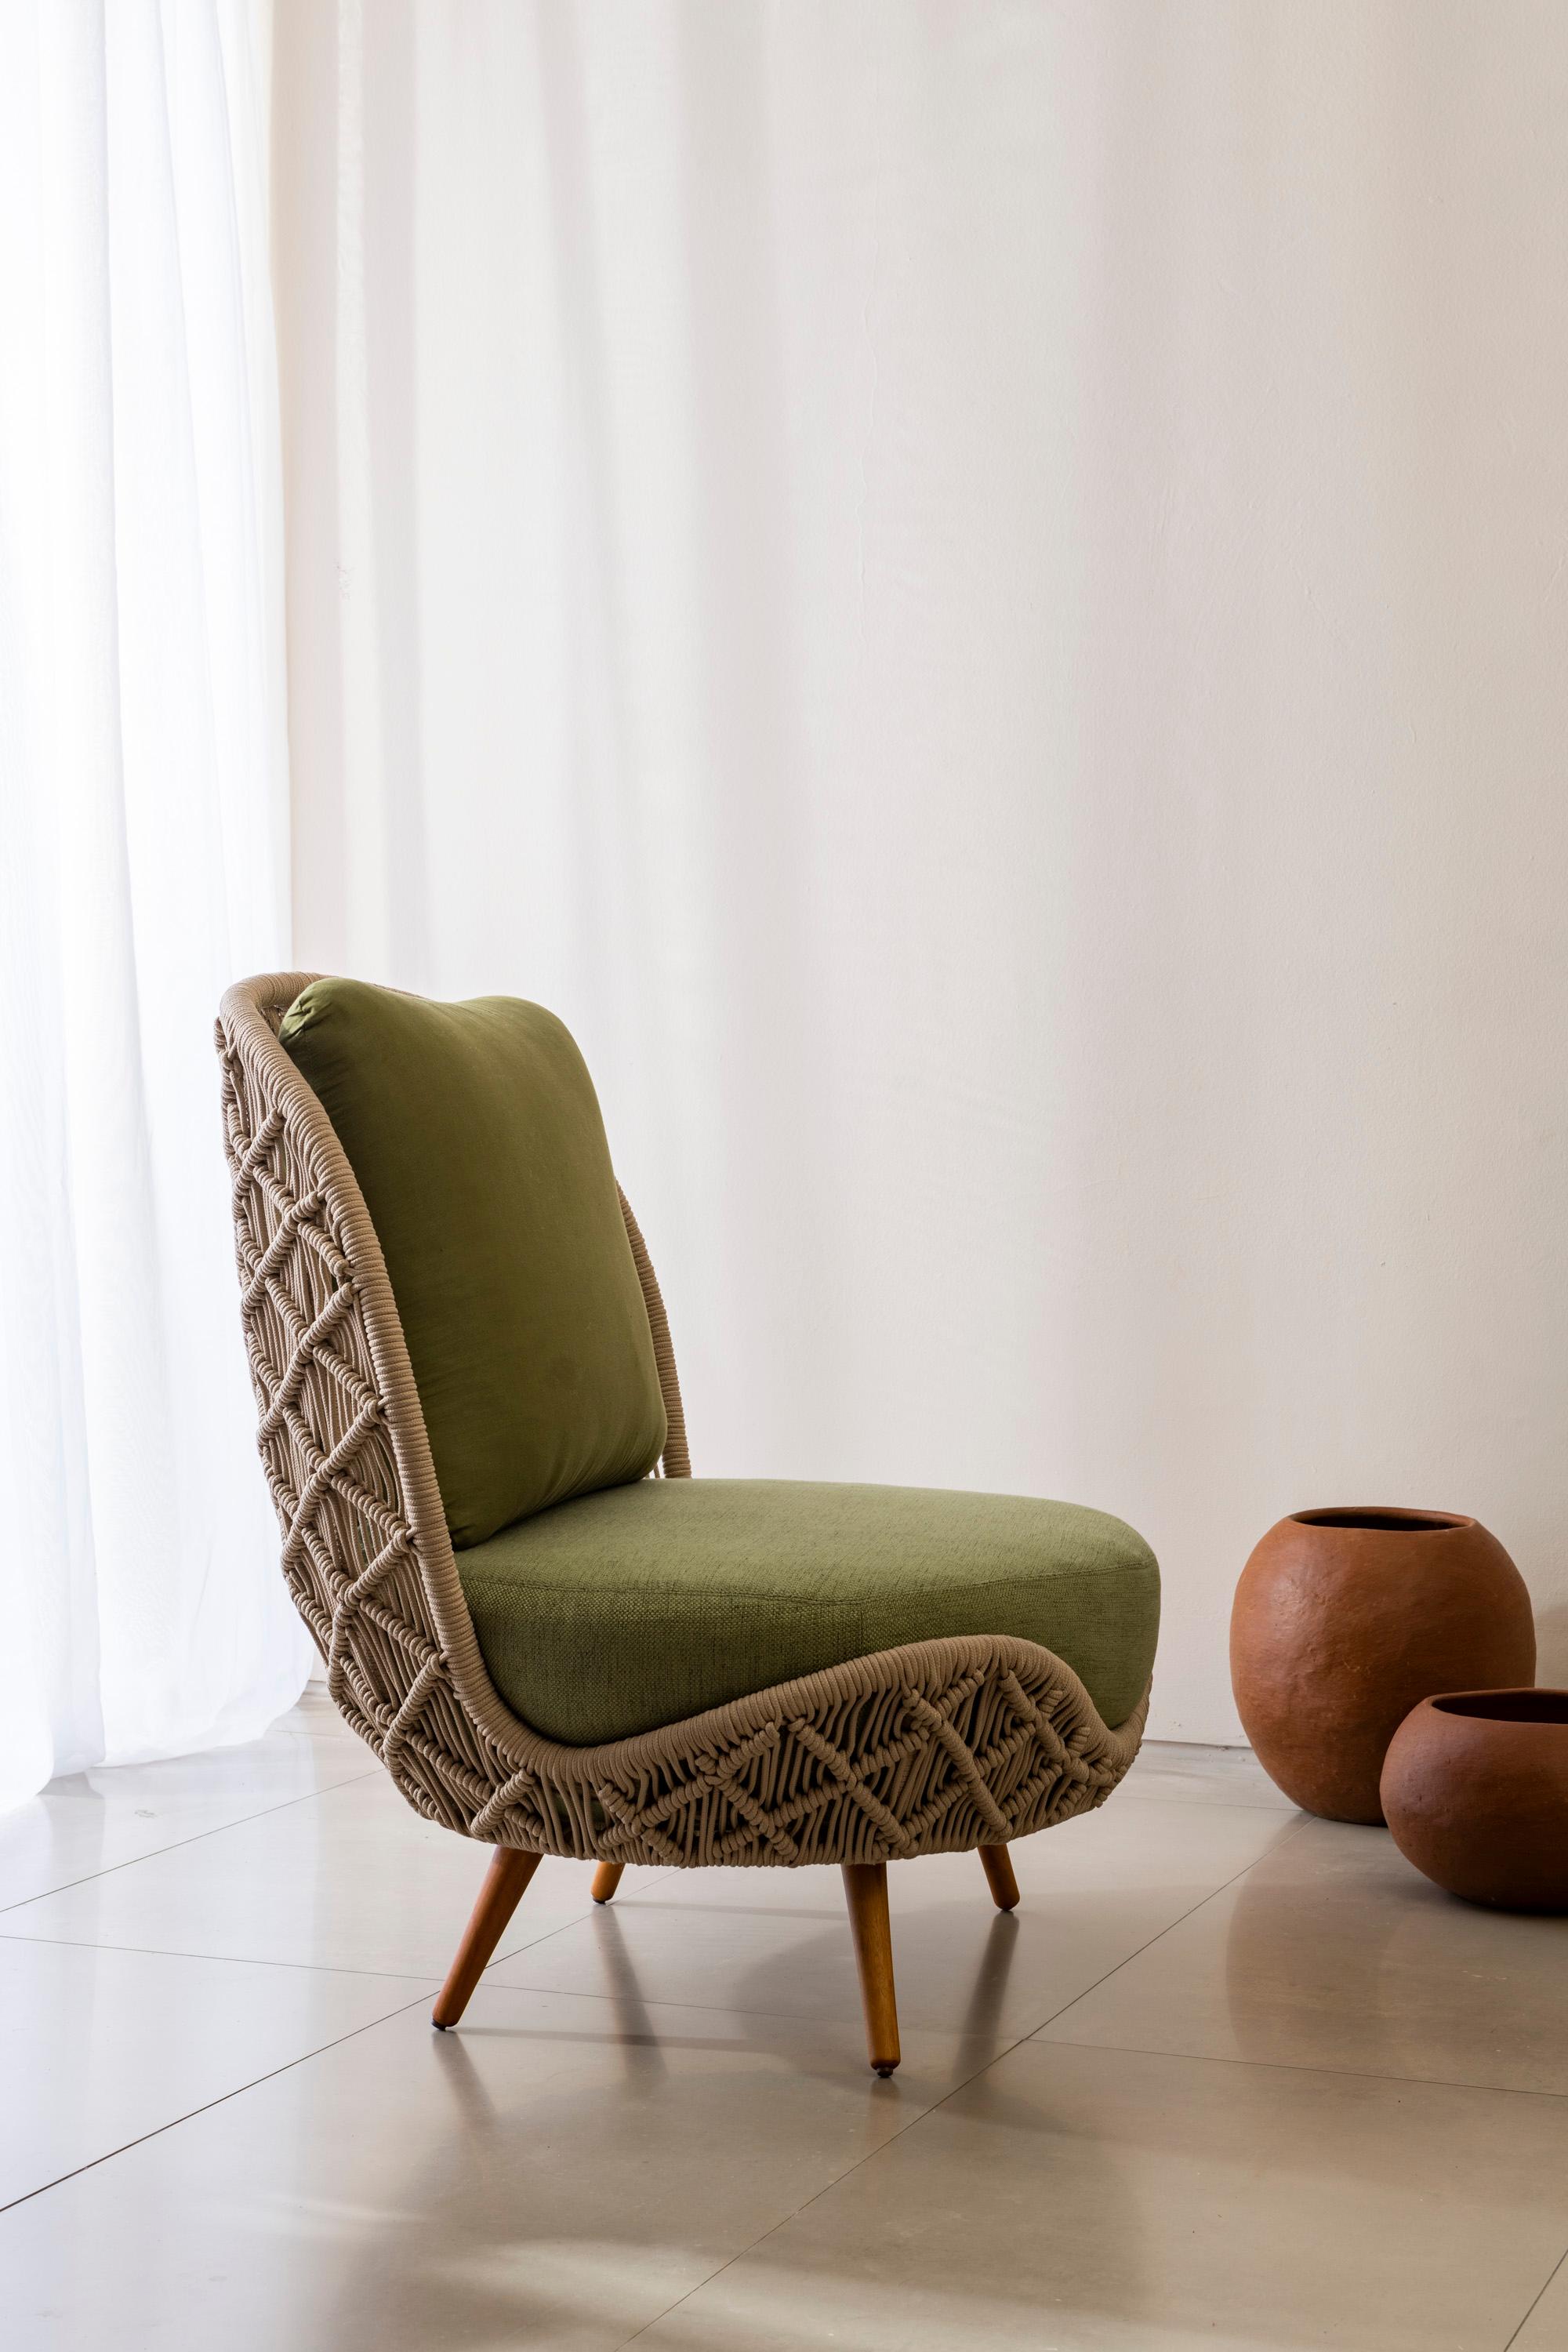 Ivaí Armchair In New Condition For Sale In Campina Grande, Paraiba